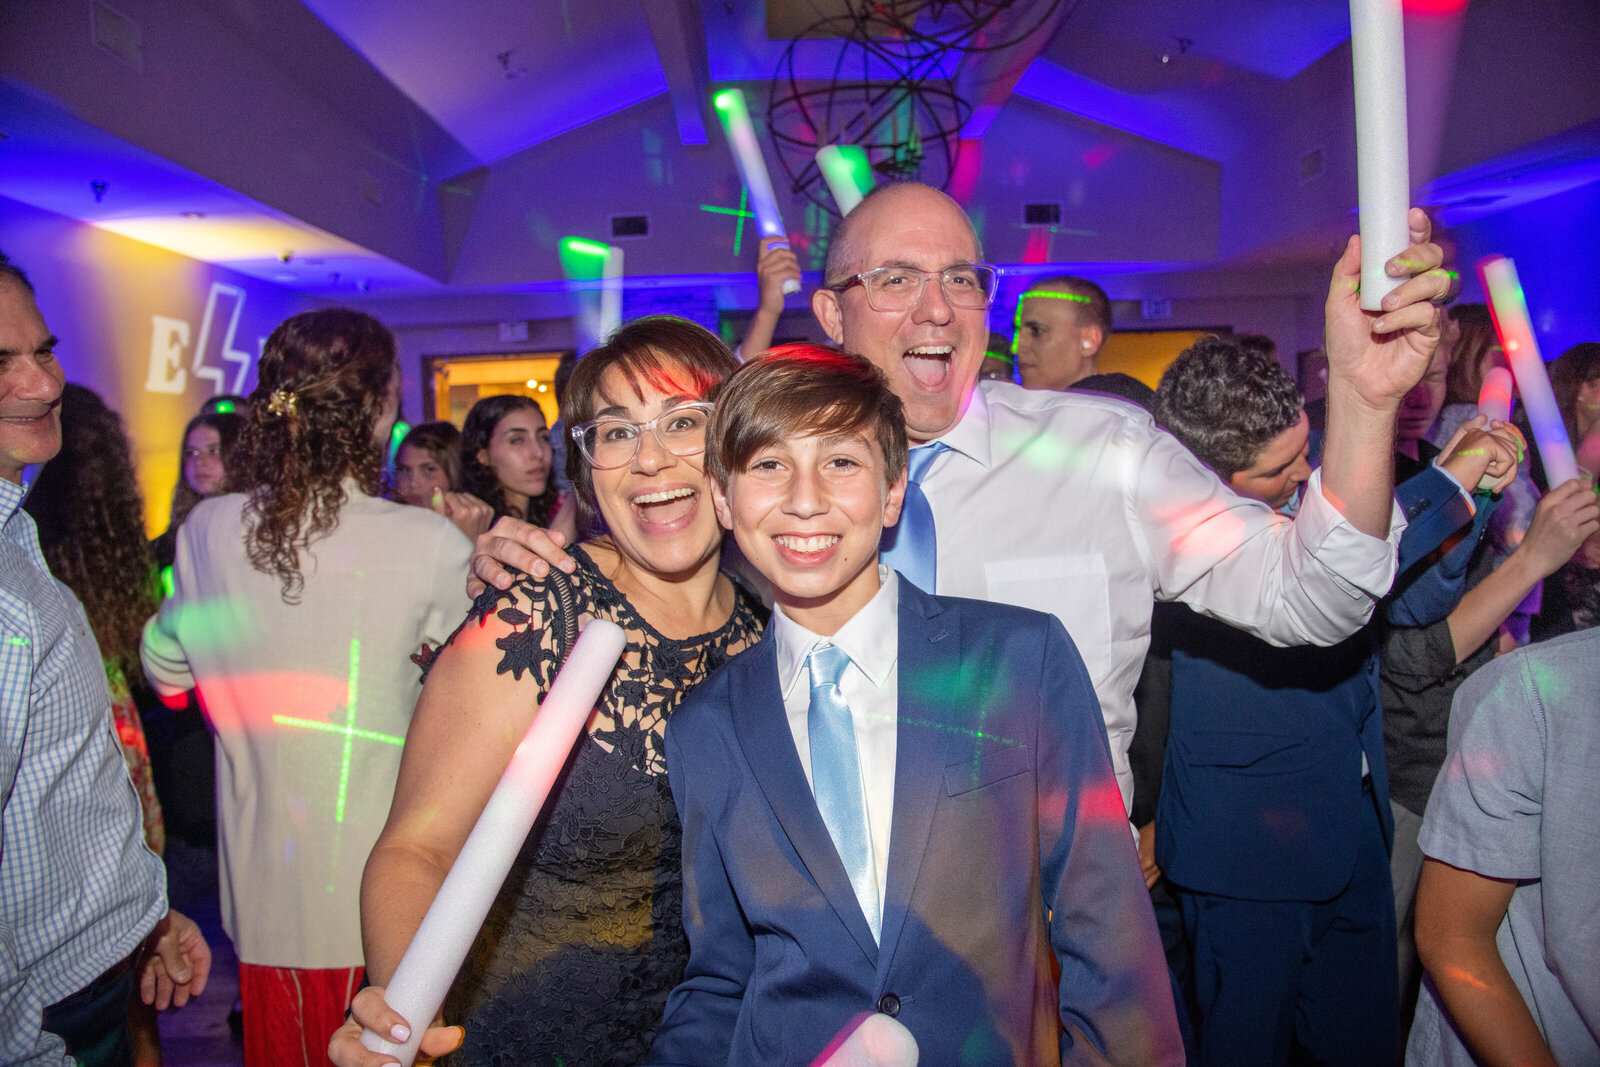 Maria-McCarthy-Photography-Bar-Mitzvah-family-party